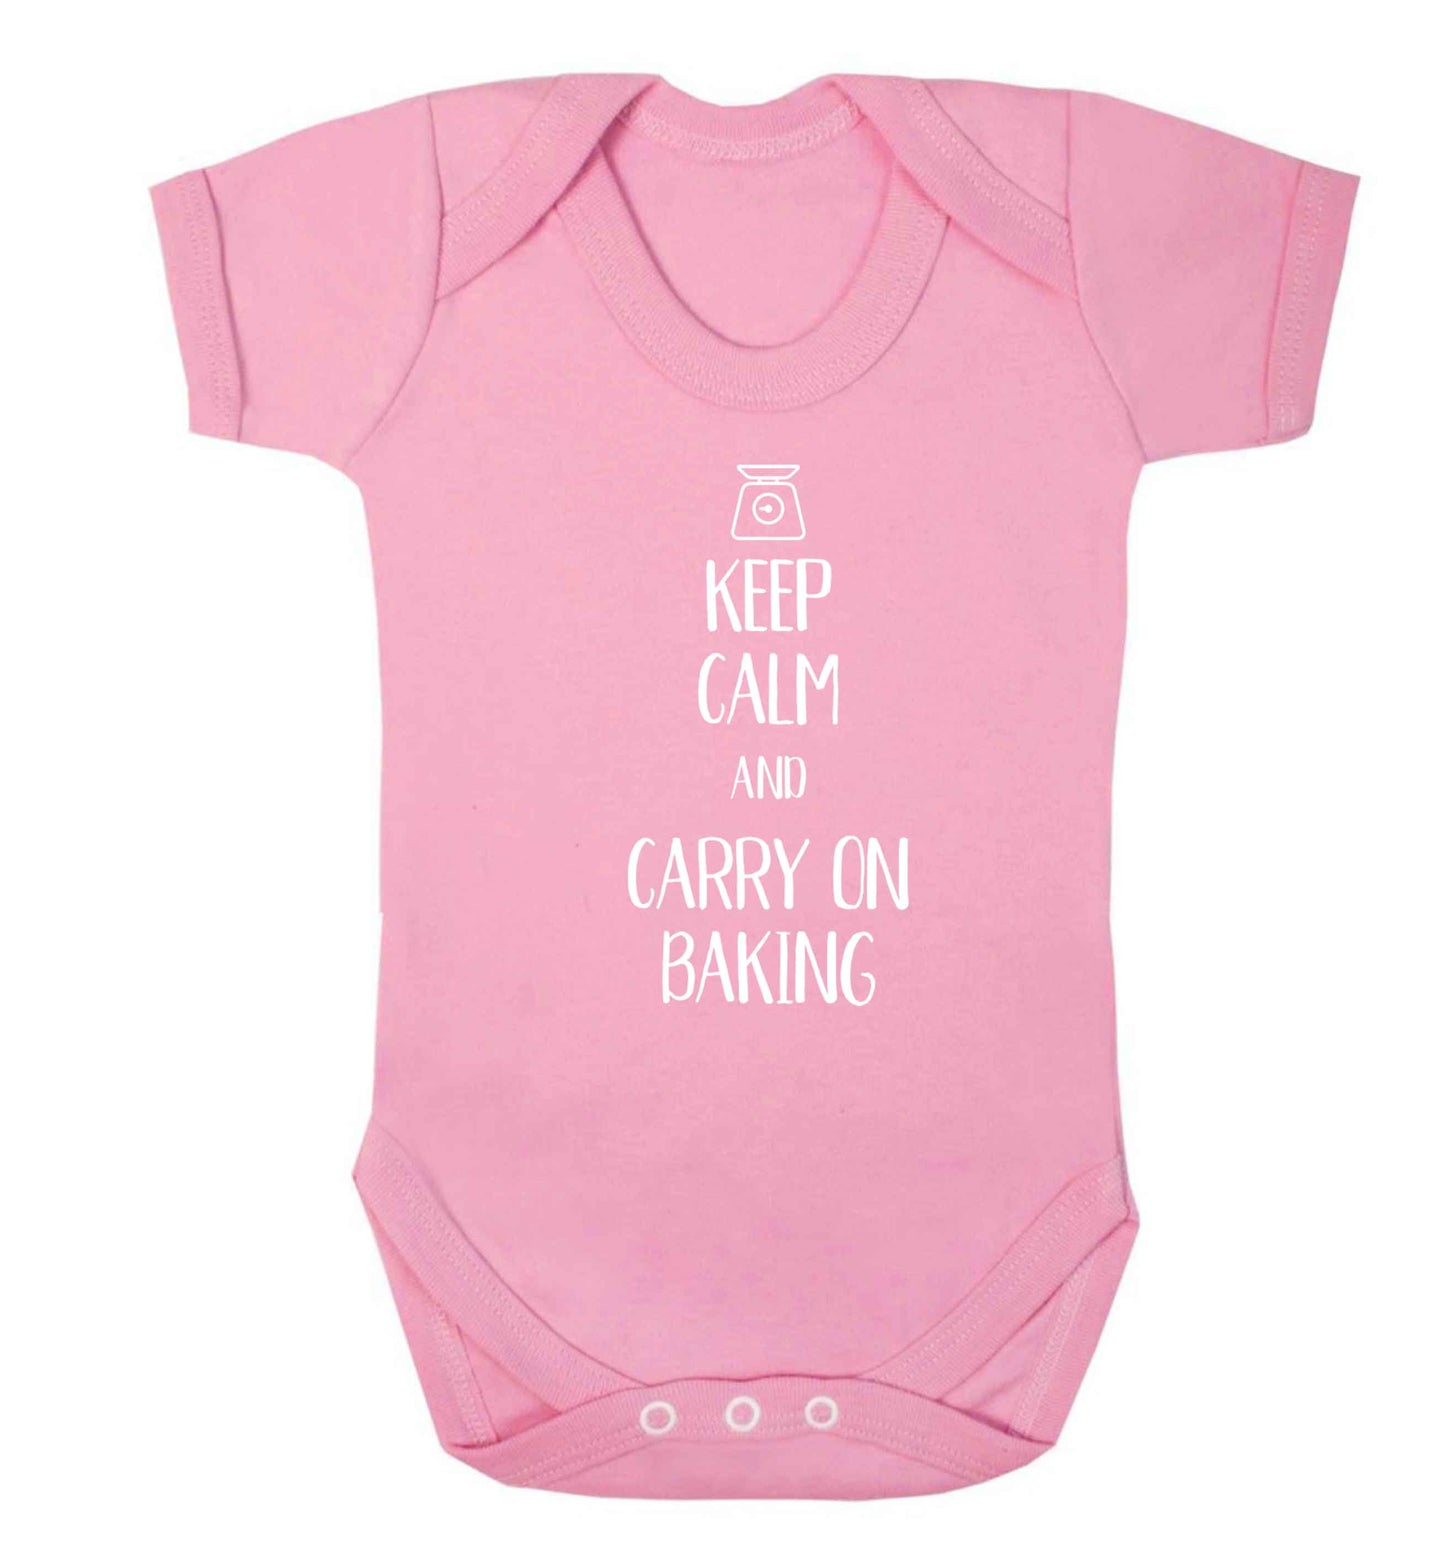 Keep calm and carry on baking Baby Vest pale pink 18-24 months